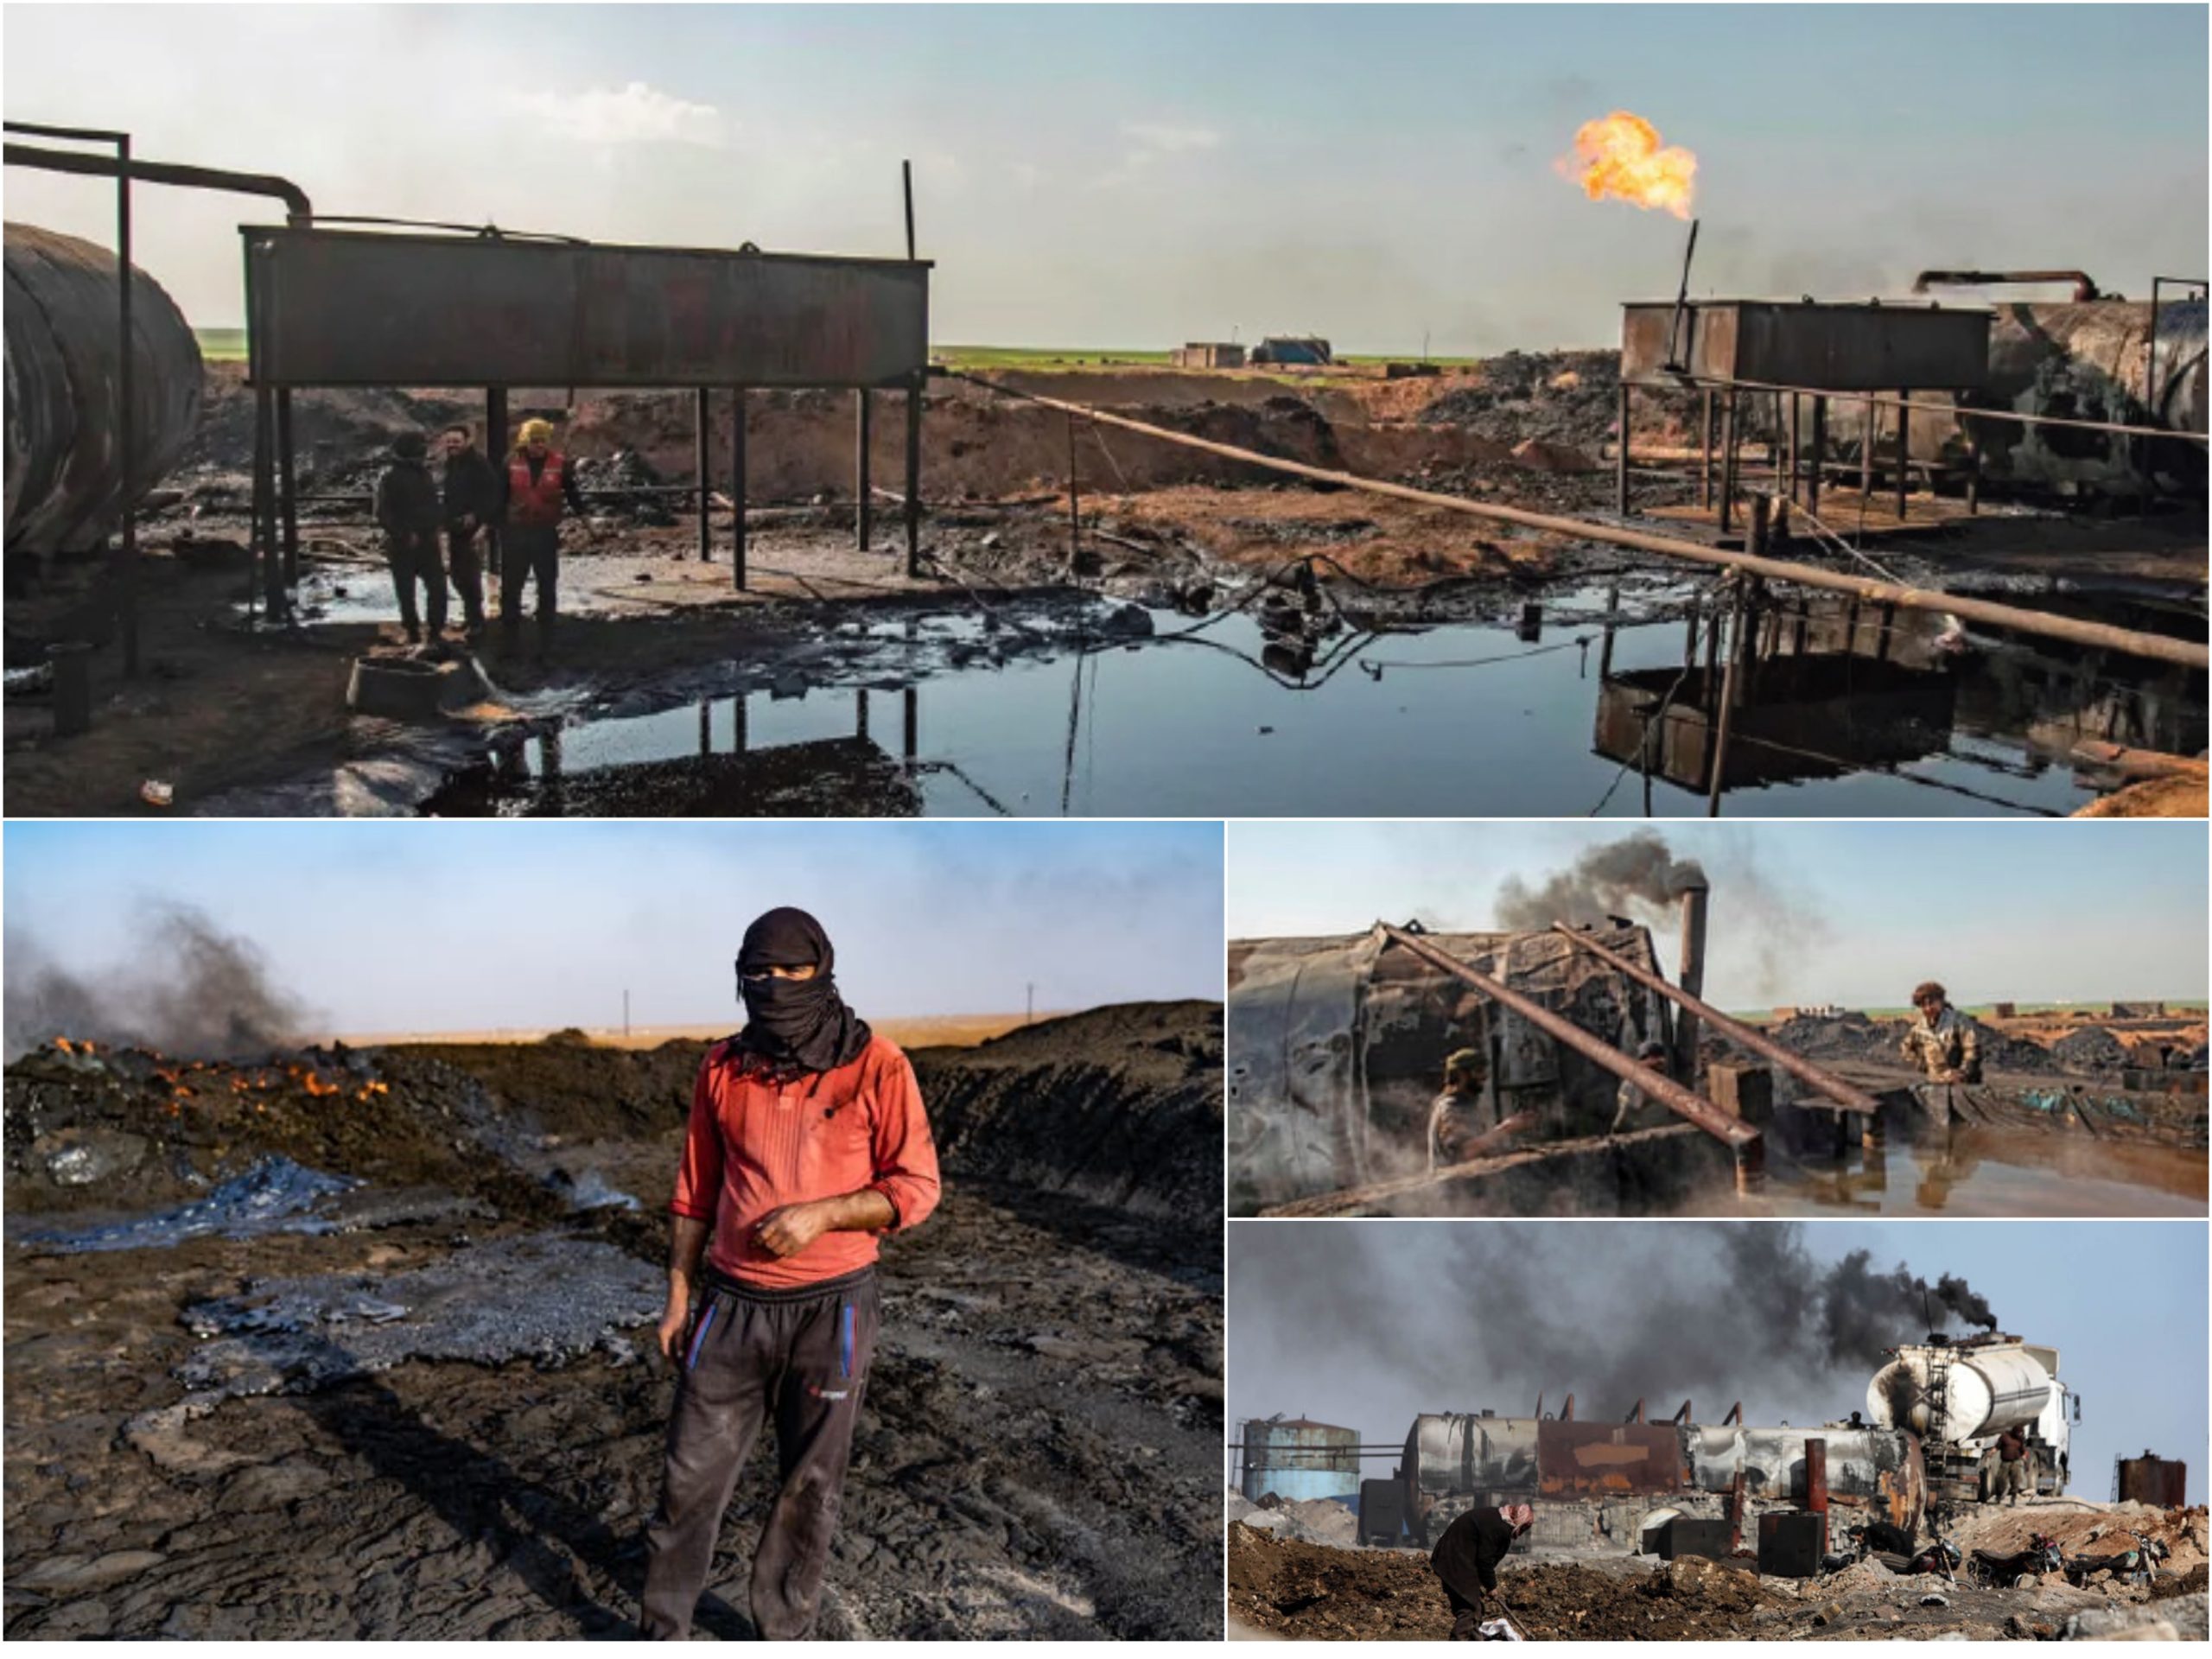 Examples of Environmental Devastation from Unsophisticated Oil Field Practices